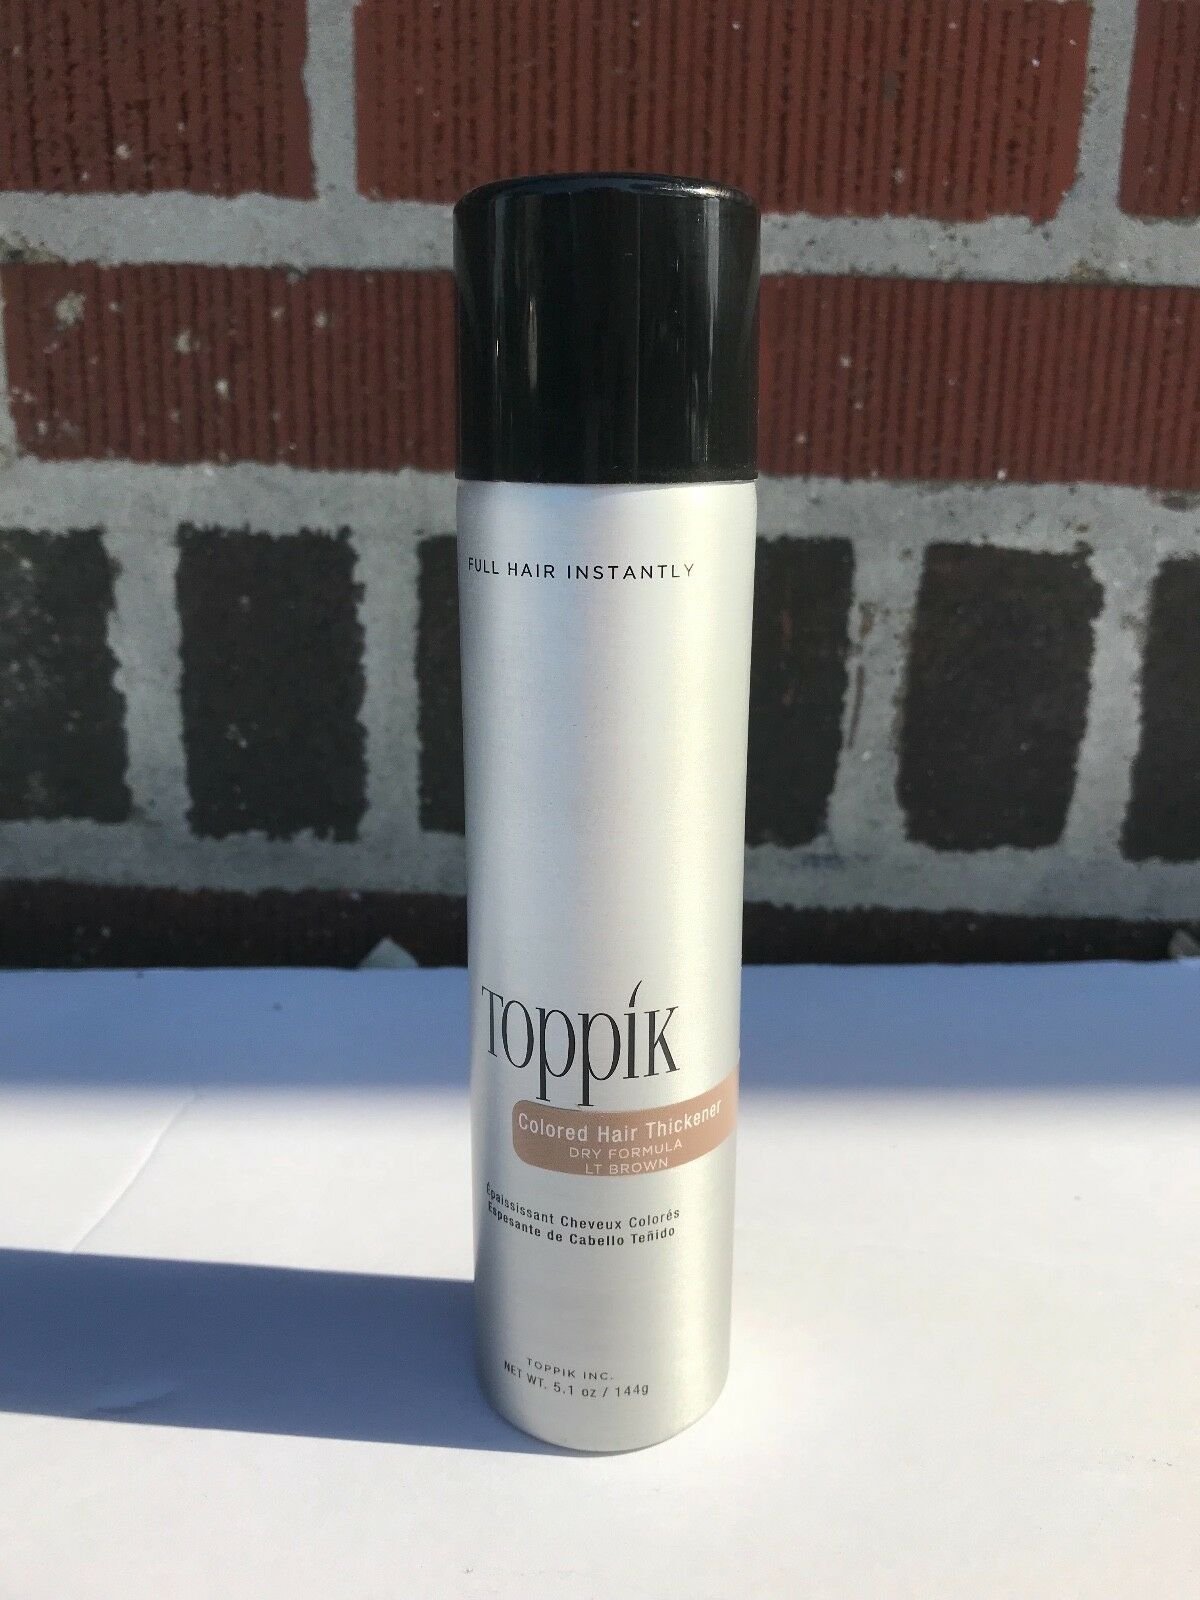 Toppik Fullmore Colored Hair Spray Thickener  oz / 144g Choose Your Color  | eBay